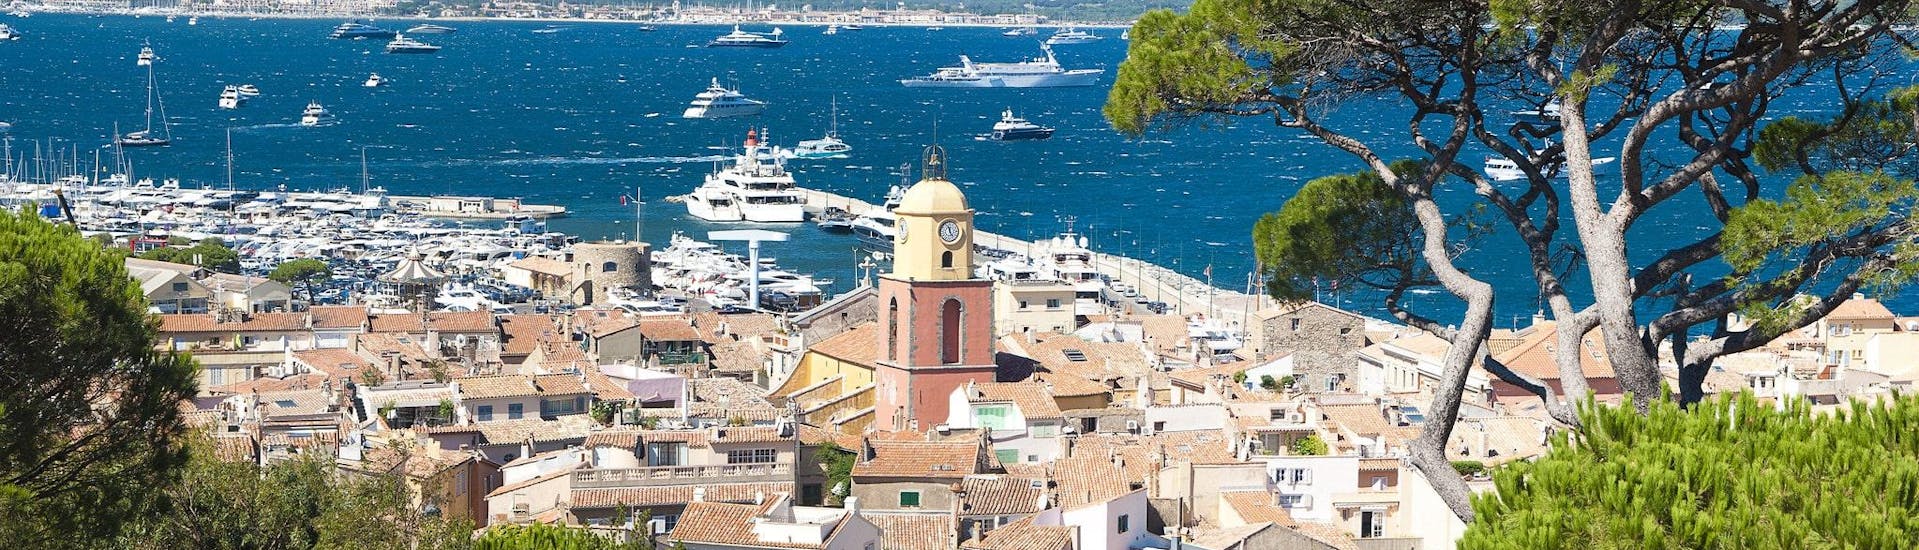 View of the port of Saint-Tropez, which is a popular starting point for boat trips along the French Riviera.